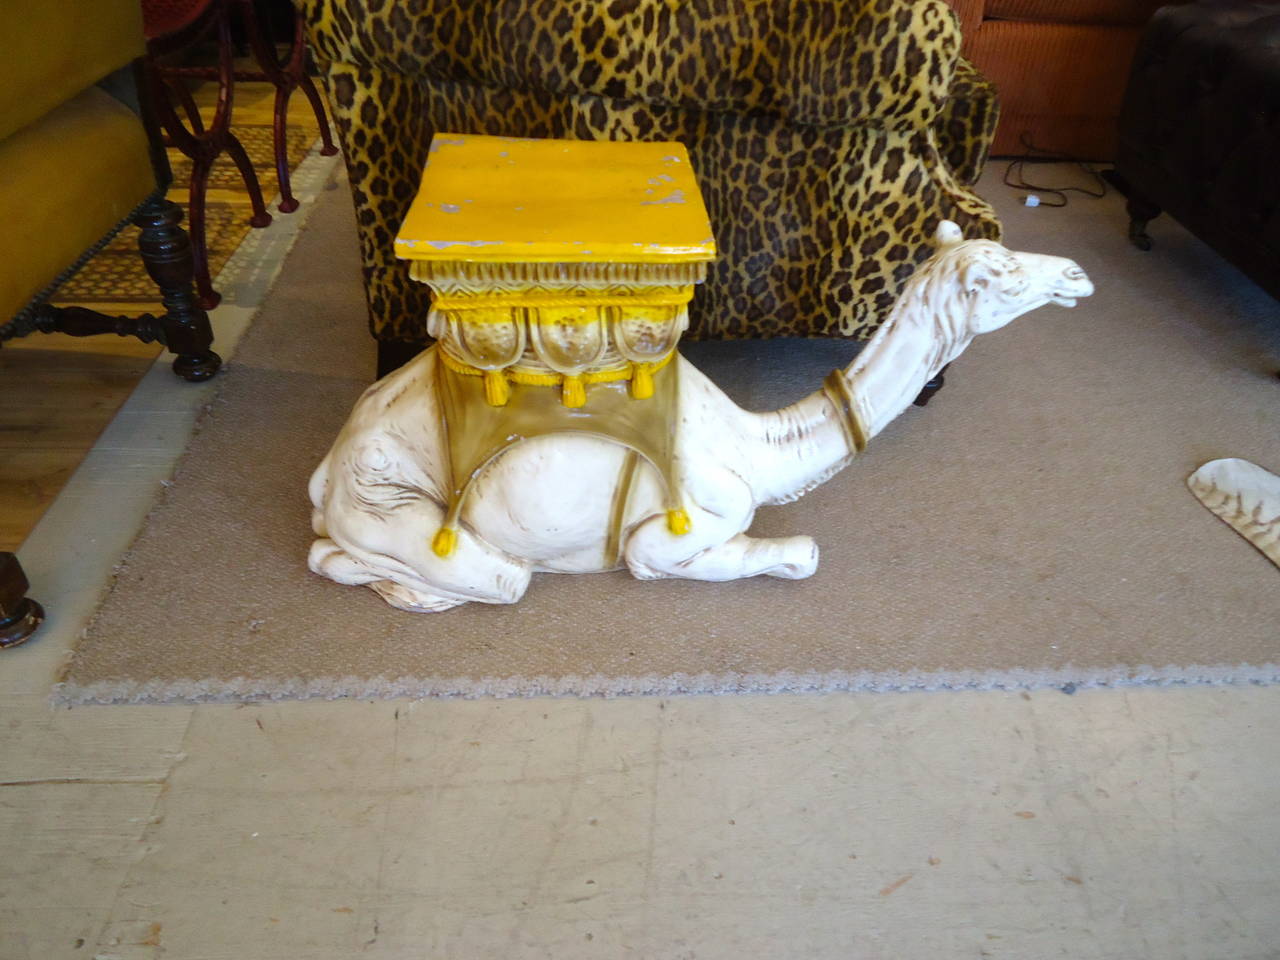 Wonderful theatrical terracotta drinks table or garden seat in the shape of a white kneeling camel with Moroccan style seat/tabletop on her back in a chippy yellow gold color. Could be easily painted, but the distressed appearance gives it age and